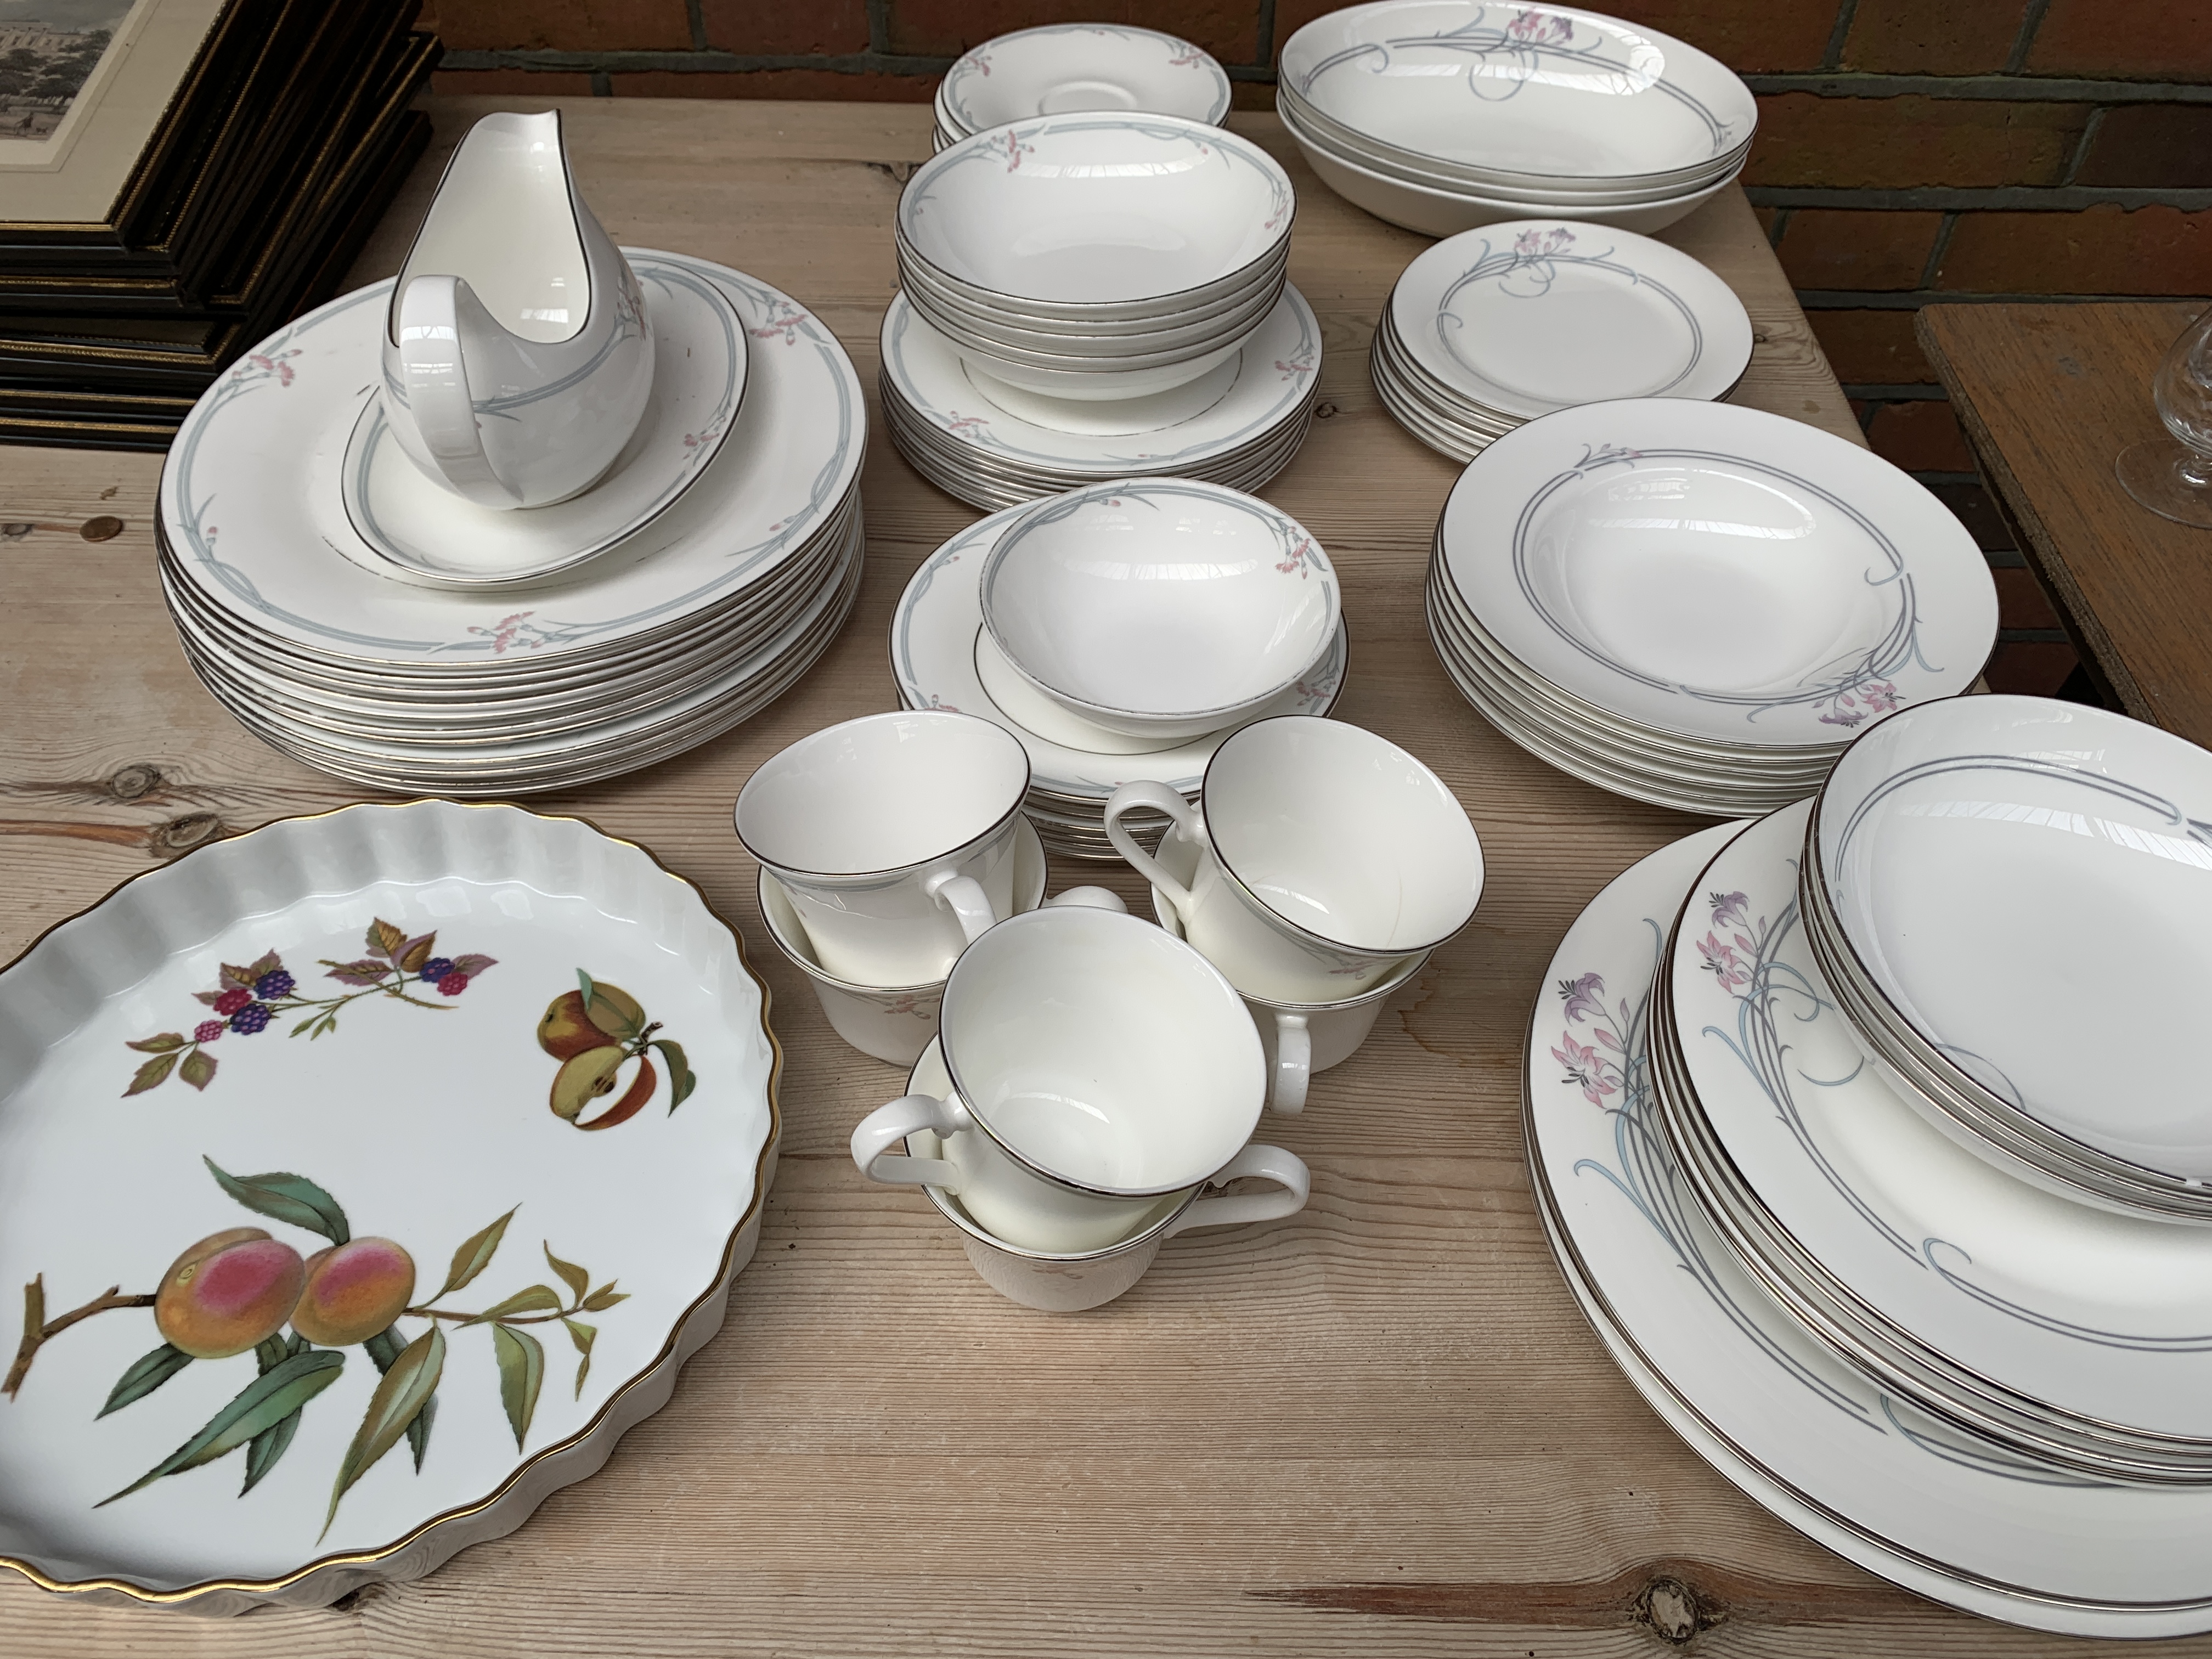 Quantity of Royal Doulton tableware and a Royal Worcester flan dish